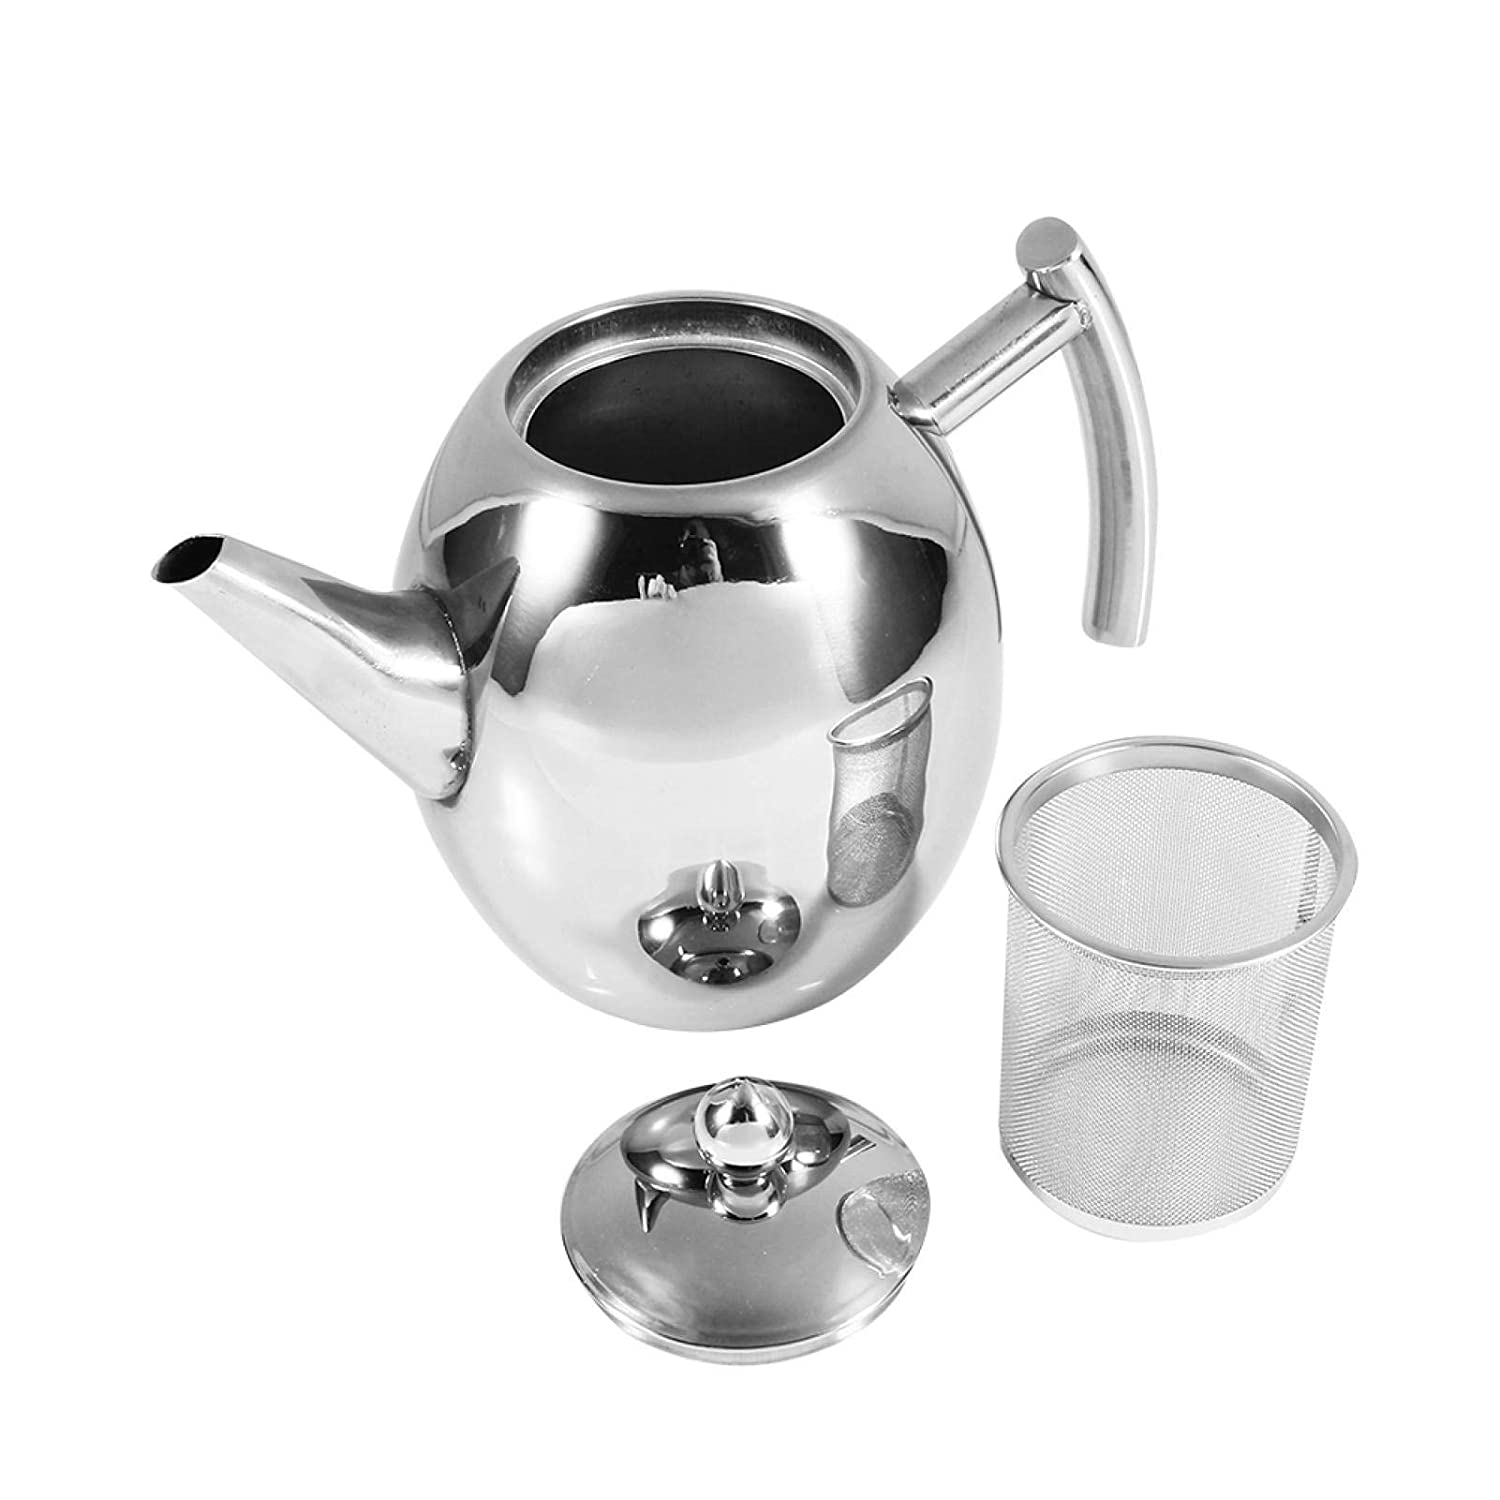 YUYTE Stainless Steel Teapot with Strainer Insert, Stainless Steel Teapot with Filter, Polished Water Cooking Café Tea Pot for Home Hotel Restaurant (Stainless Steel)